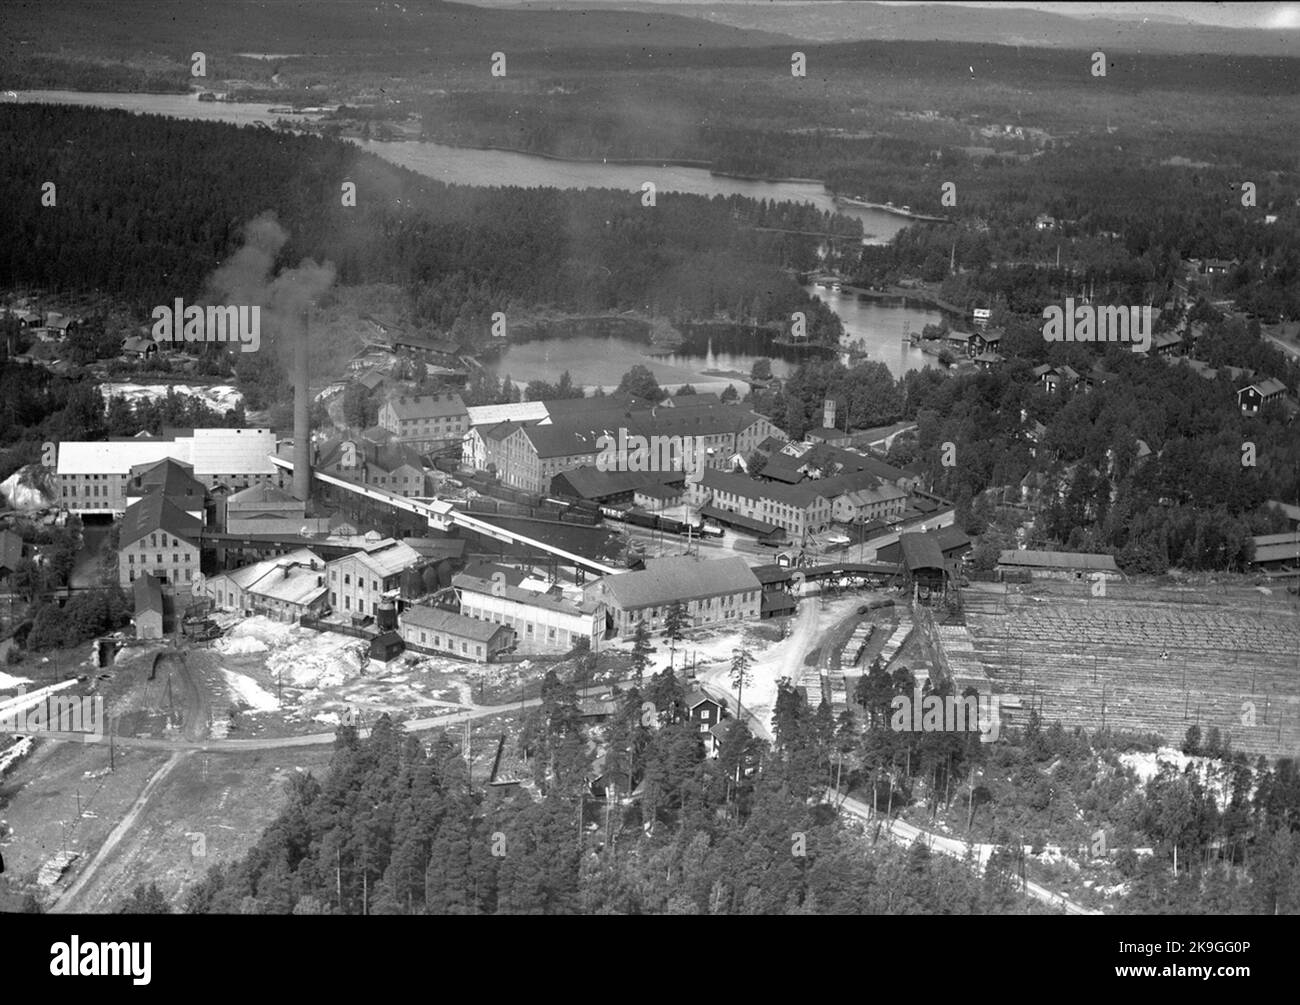 Aerial photo over Grycksbo paper mill. Stock Photo